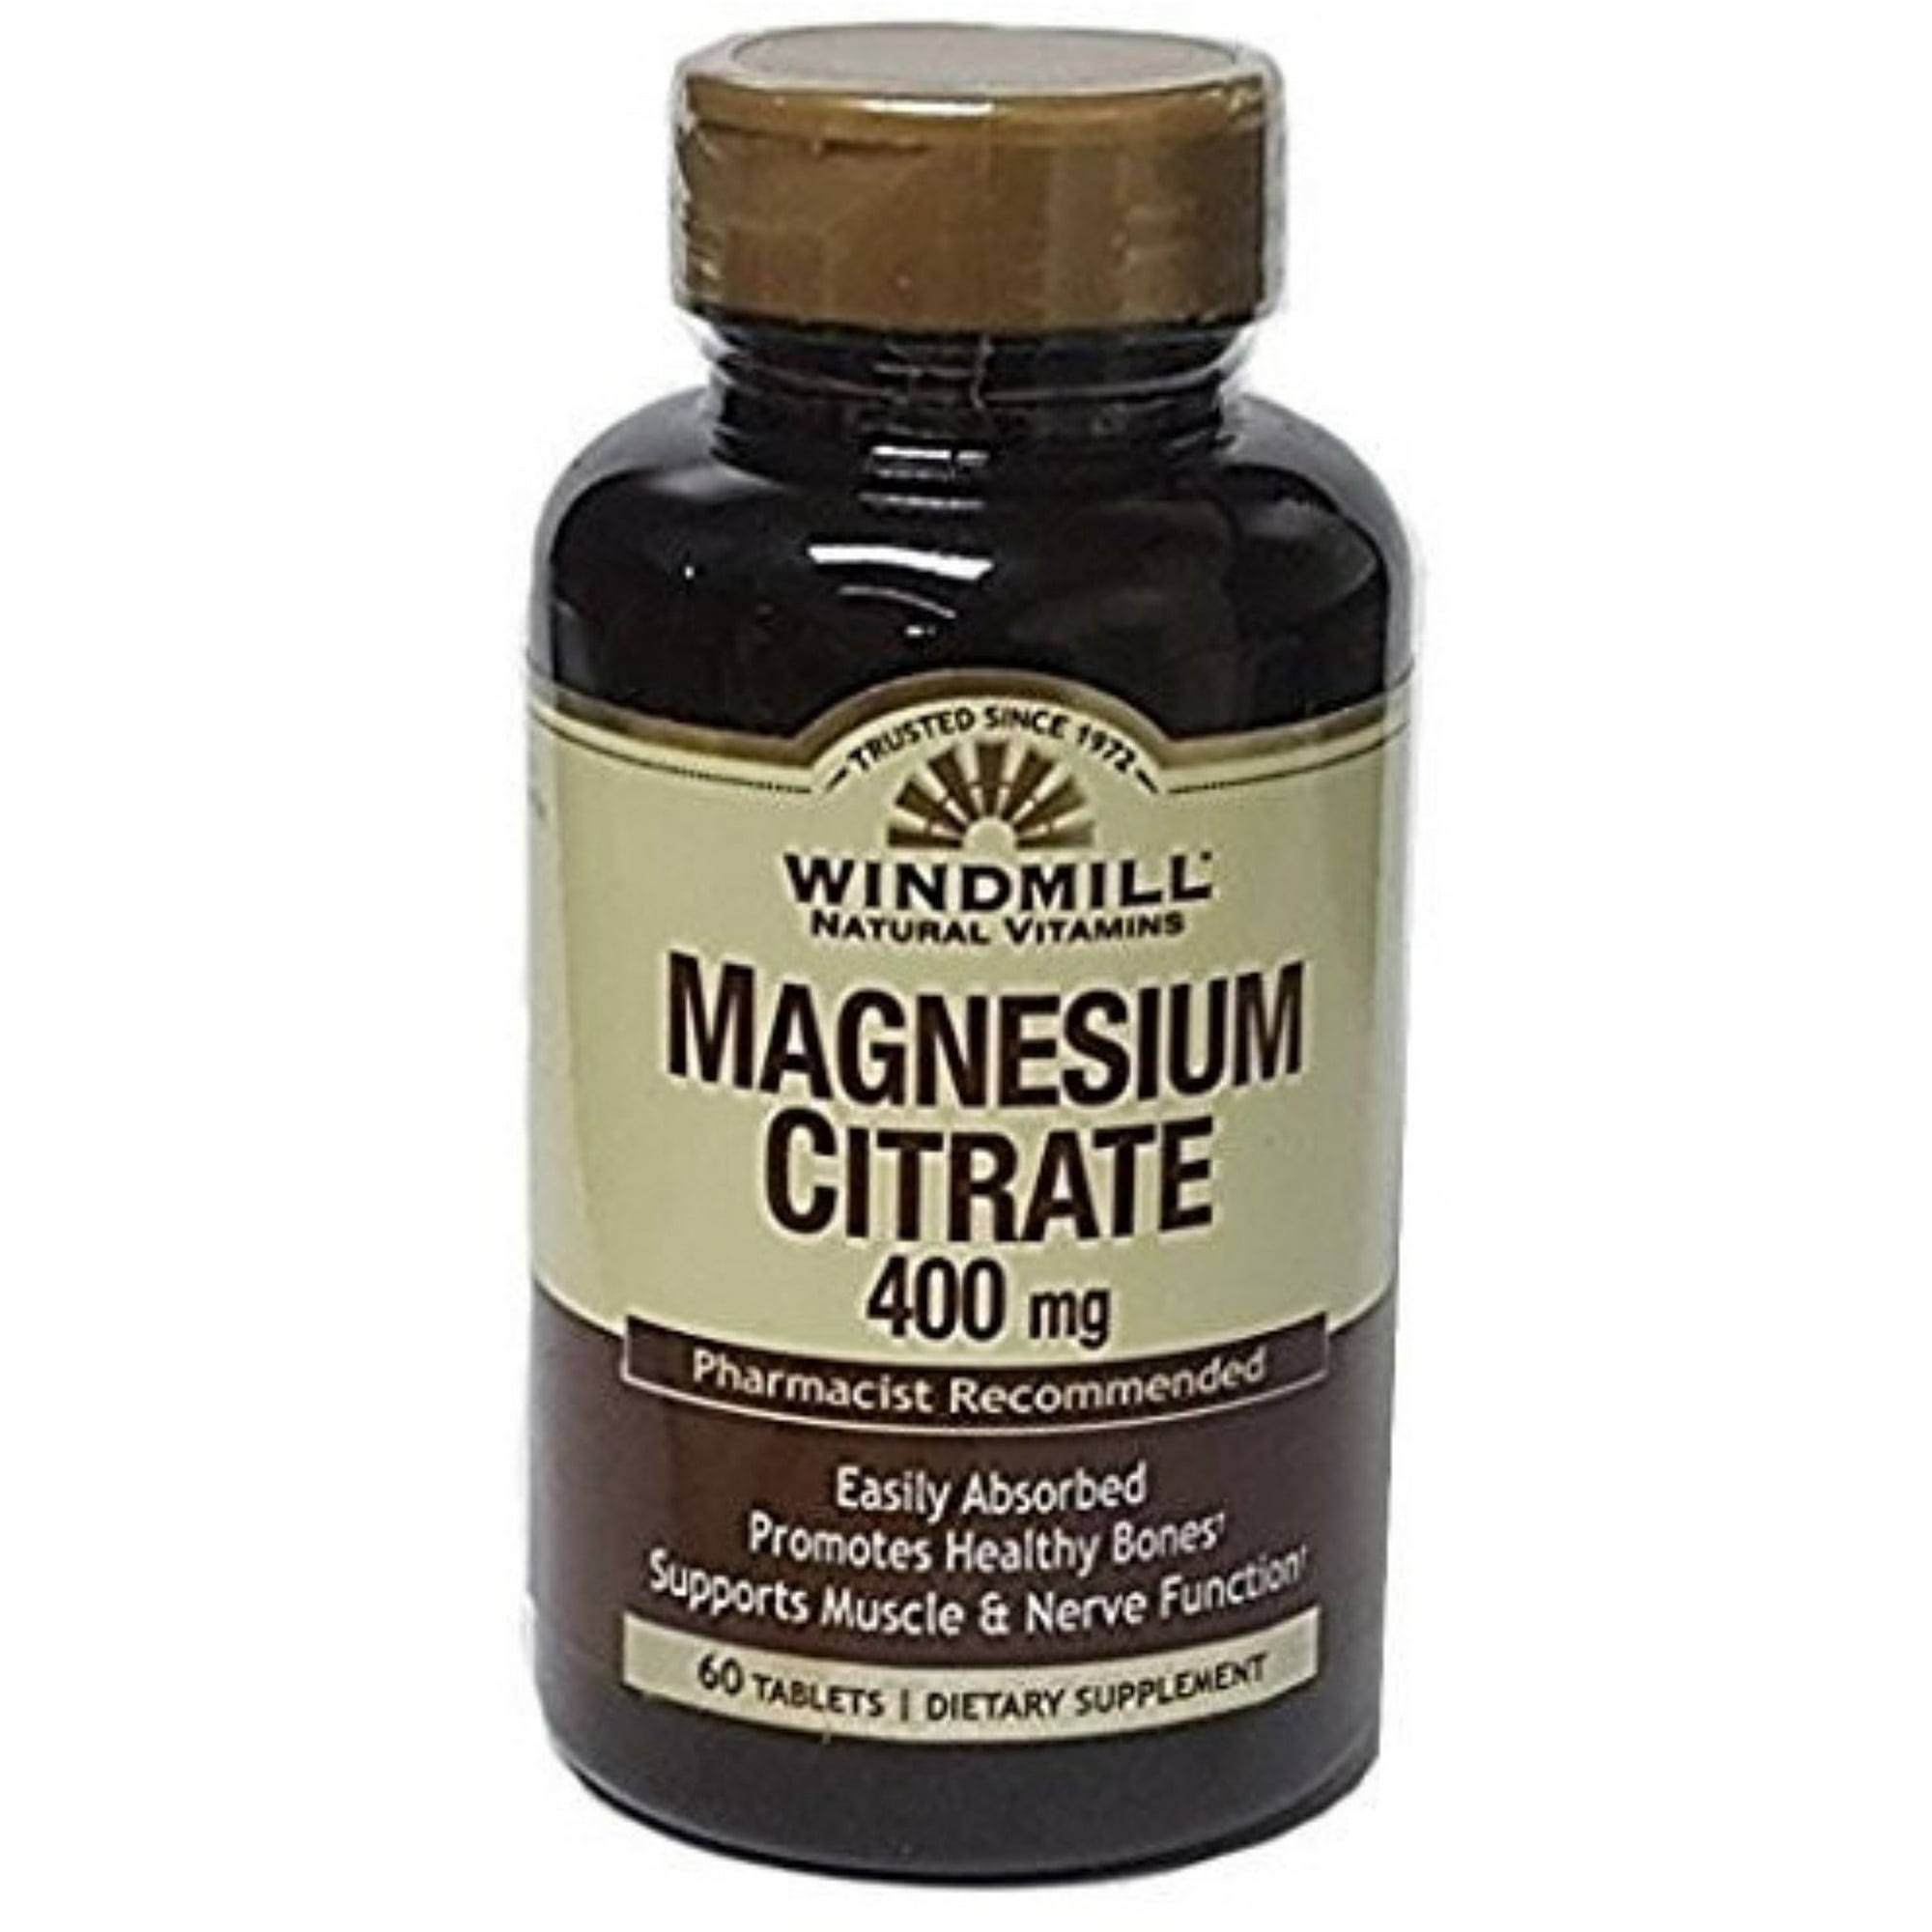 Windmill Magnesium Citrate 400mg 60 Ct